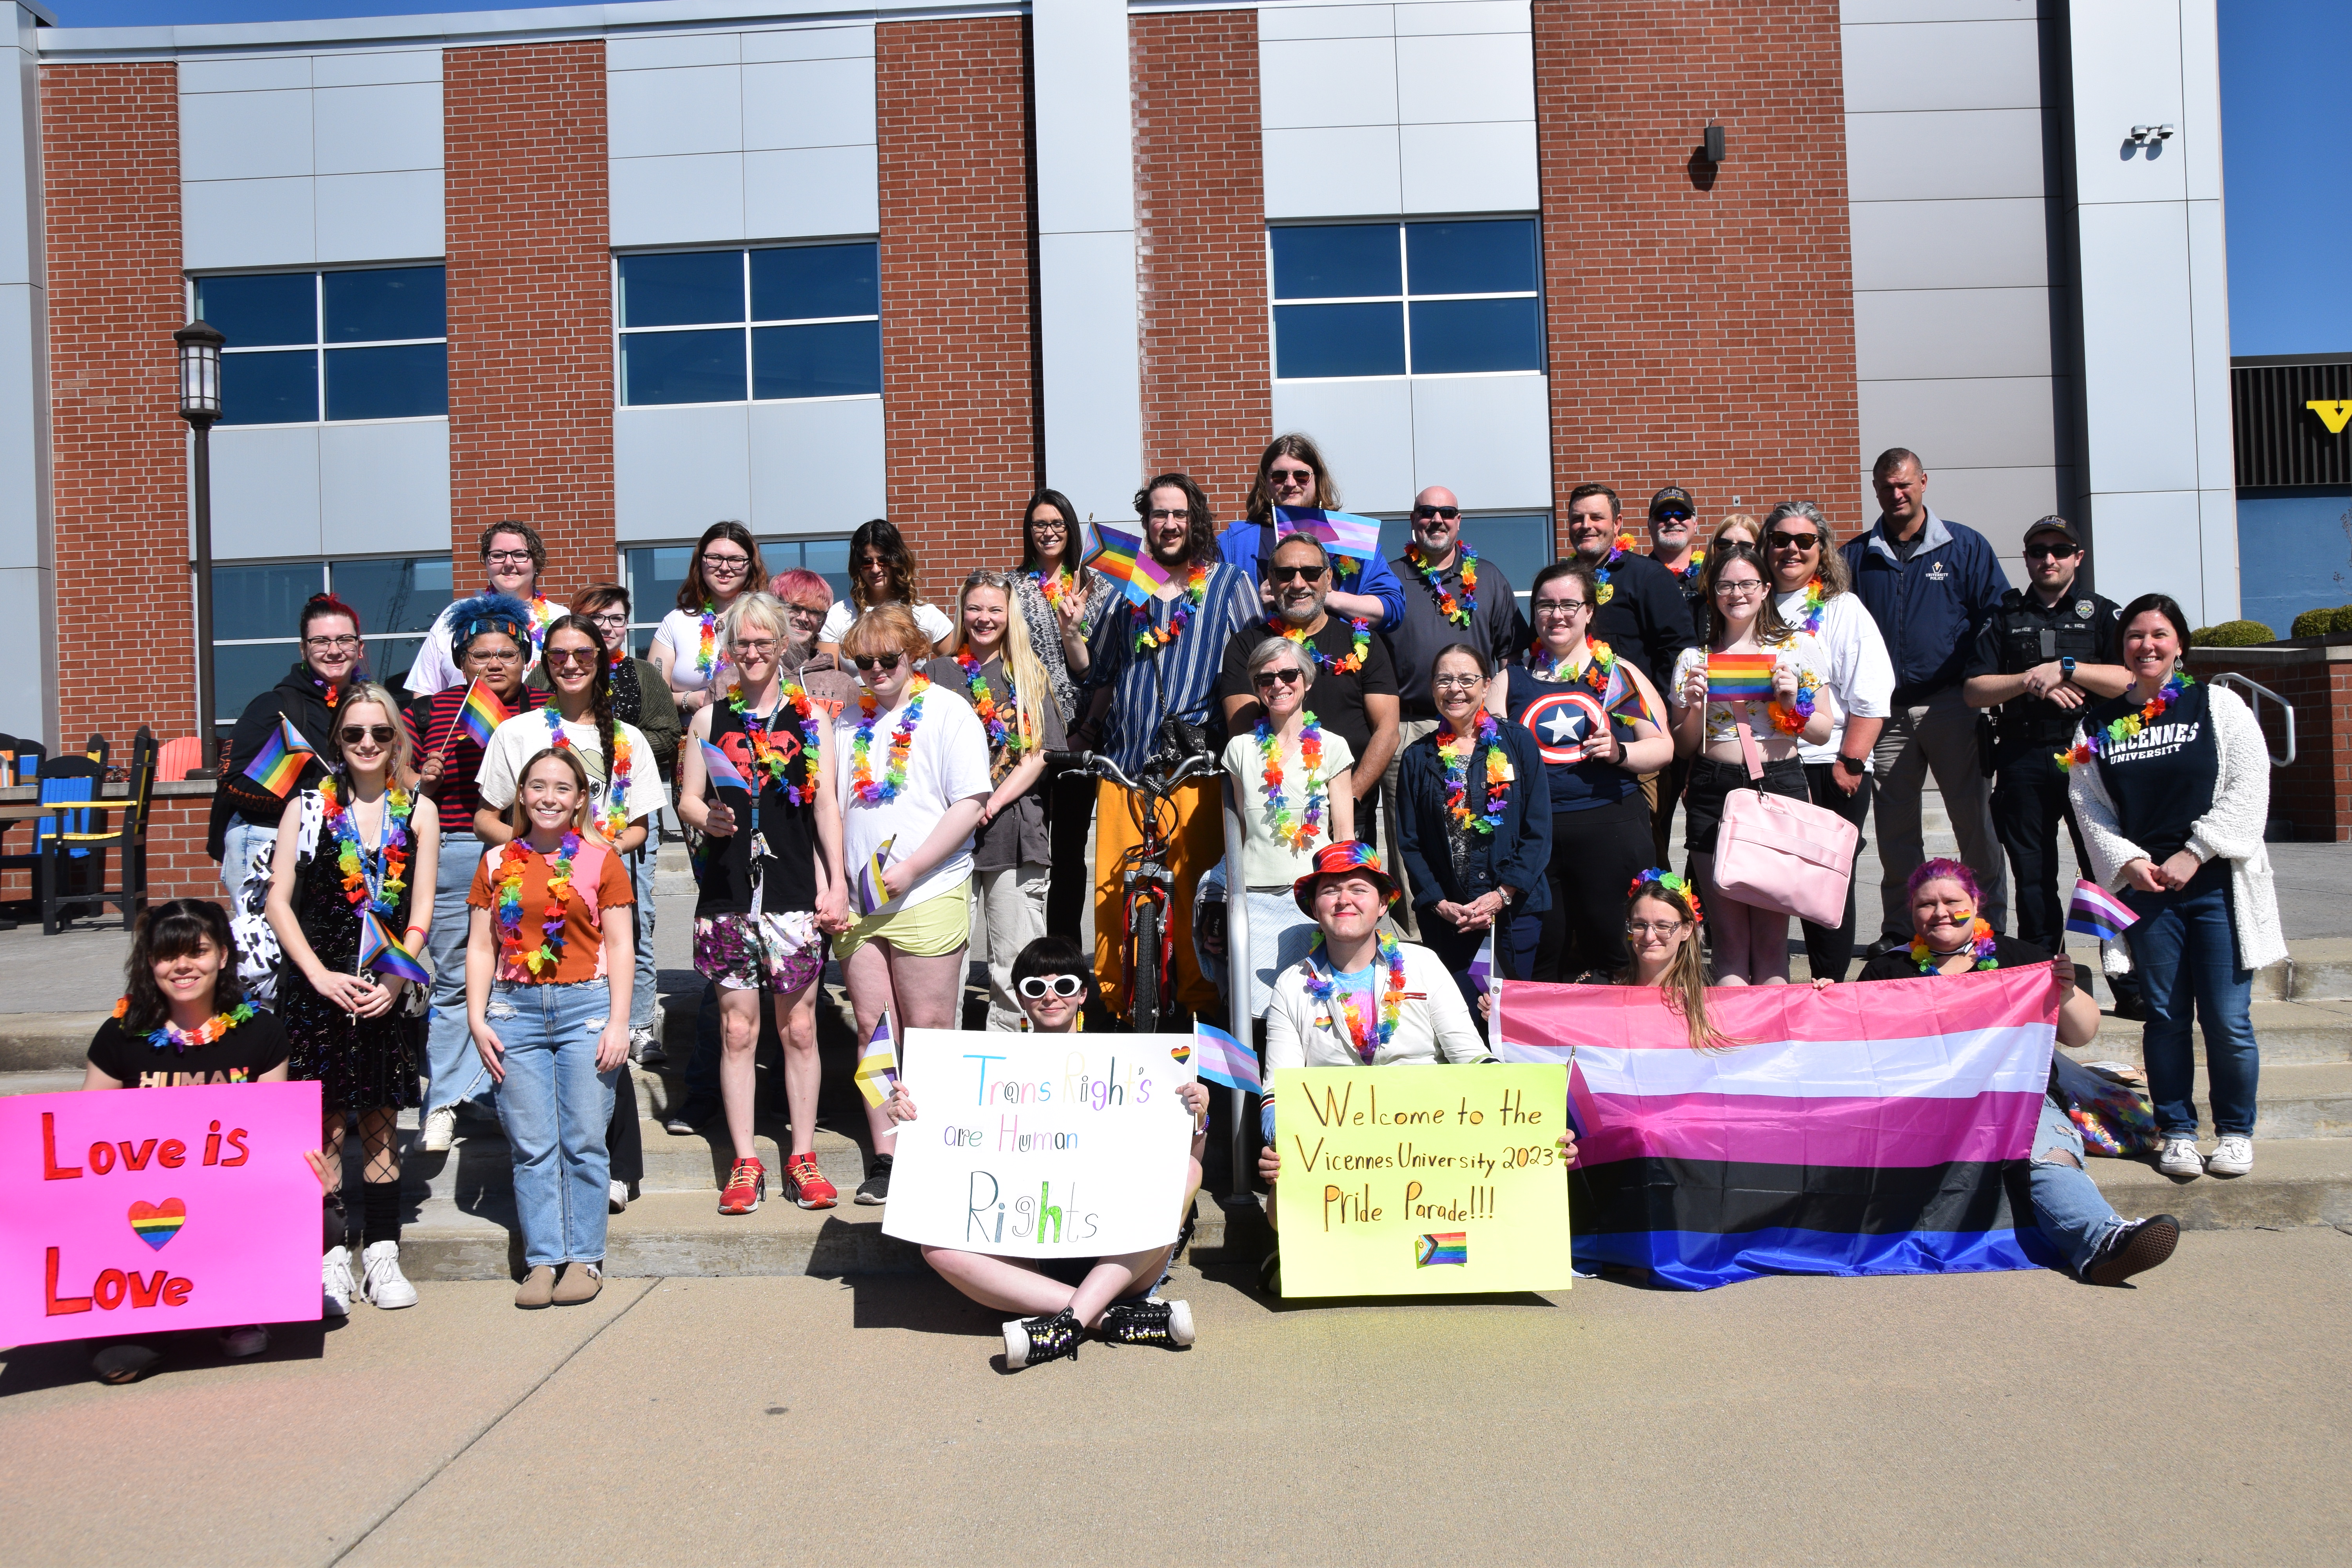 Students, faculty, and staff pose for a photo at the end of the Pride Walk in front of Jefferson Student Union.